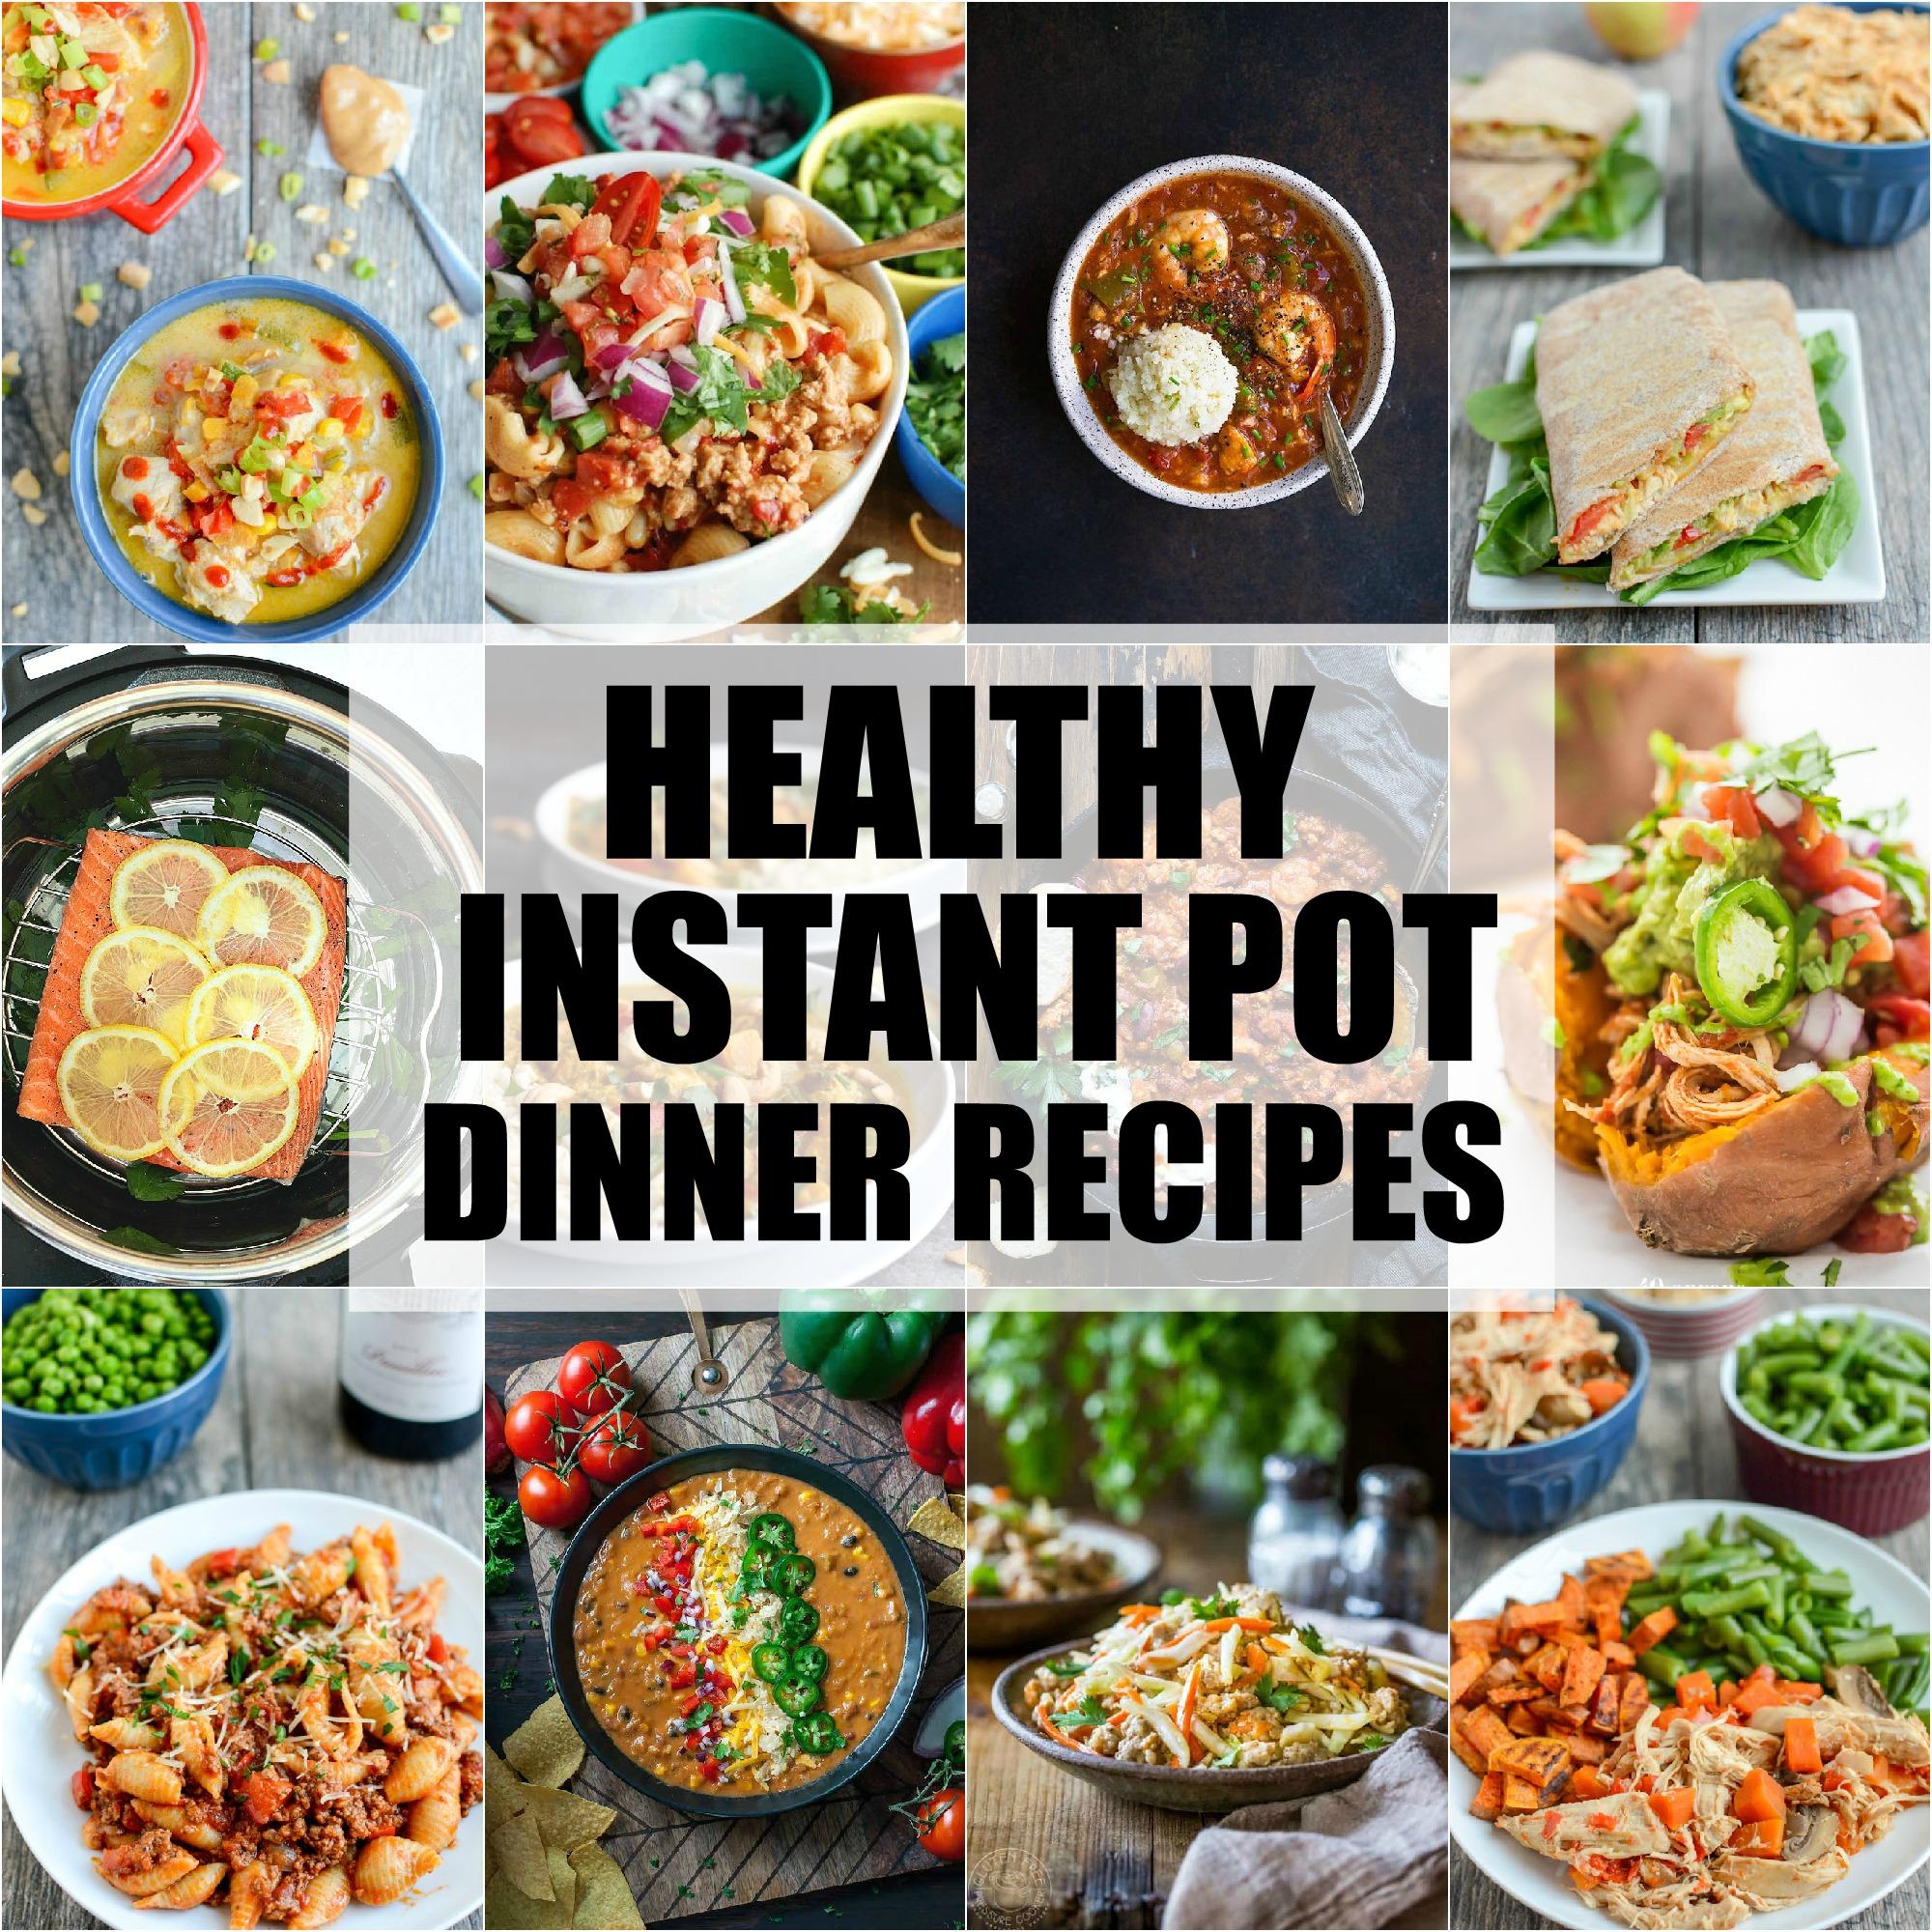 Healthy Instant Pot Dinner Recipes | The Lean Green Bean